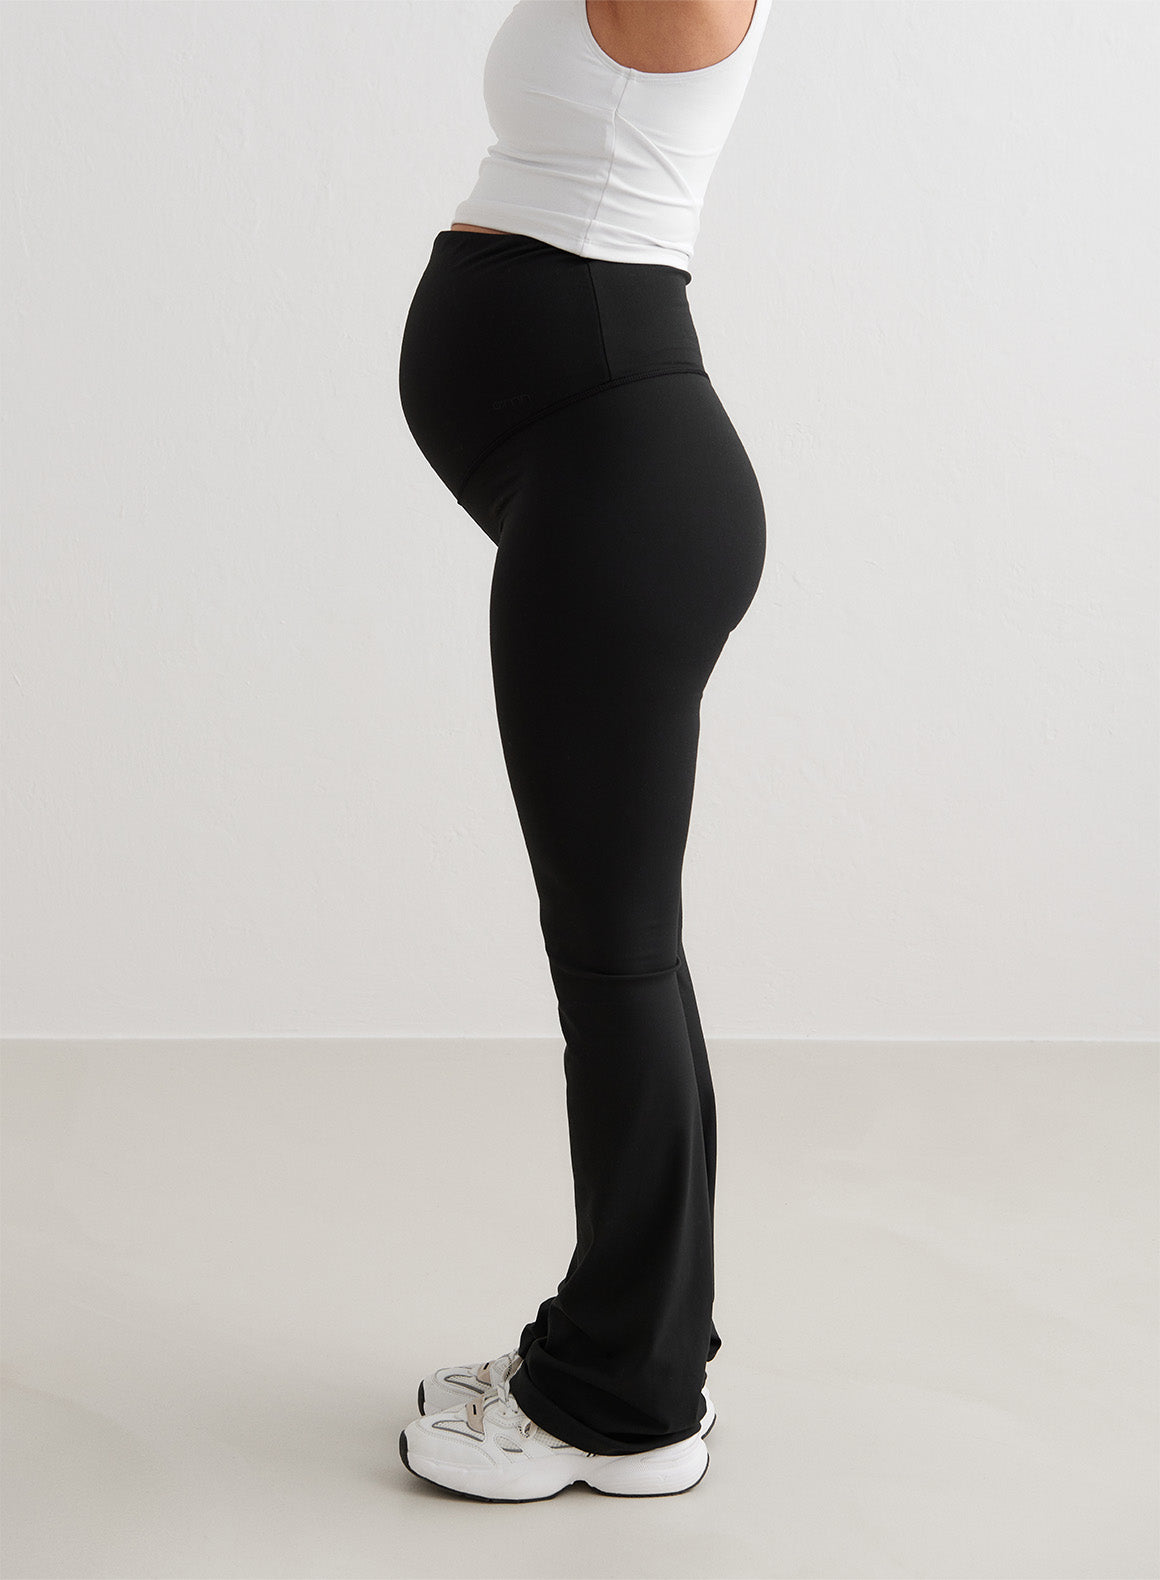 PETITE Pregnant Women Korean Stocking (With TRACKING) Maternity Underwear  Tights